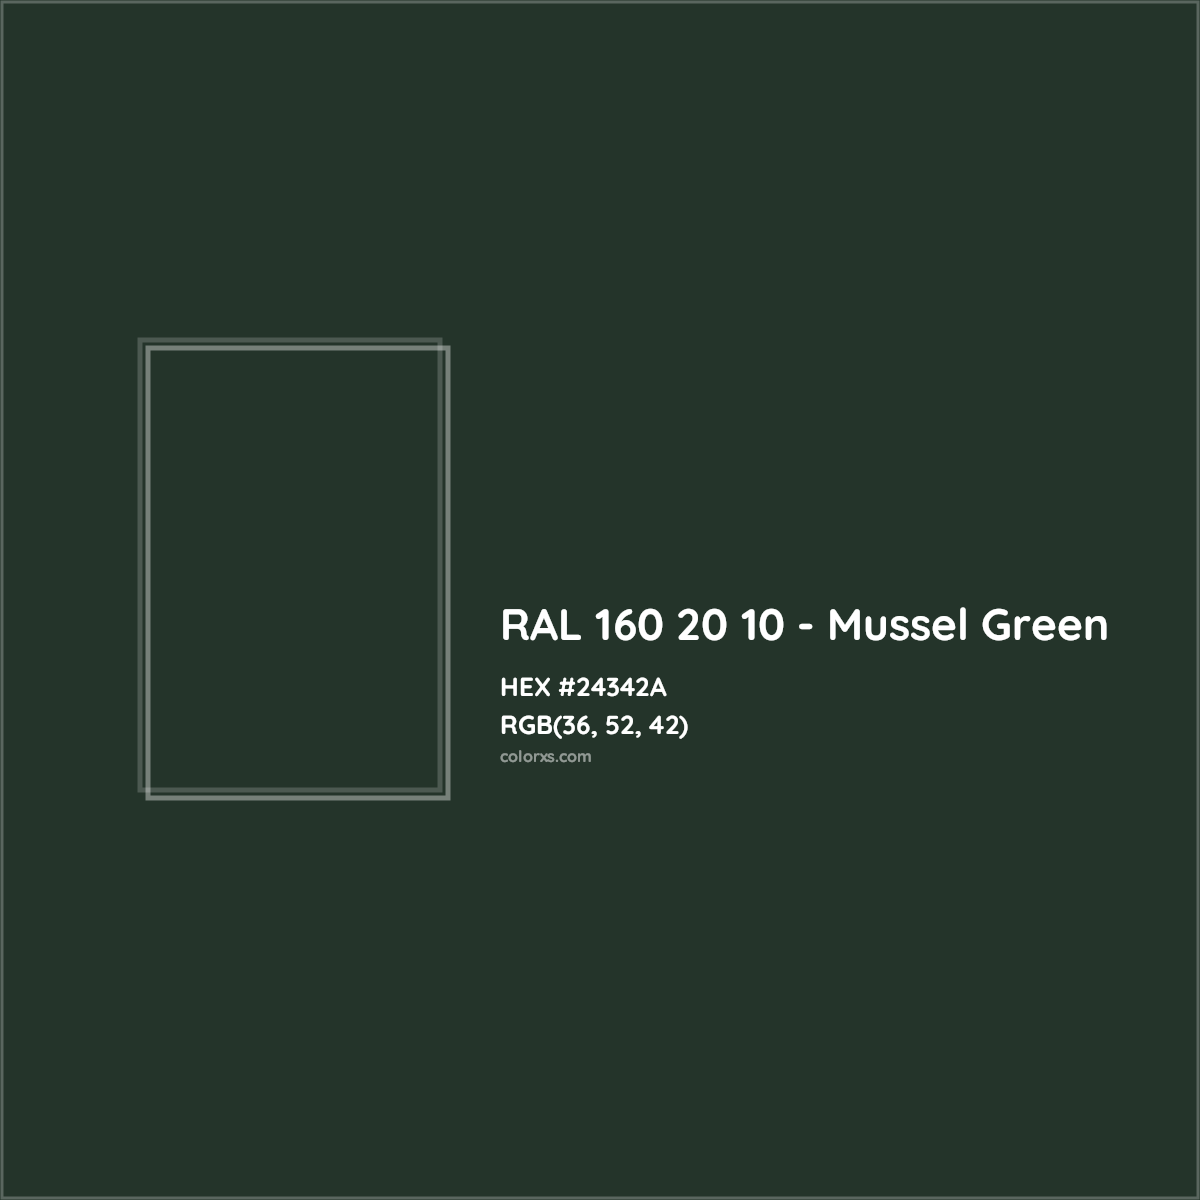 HEX #24342A RAL 160 20 10 - Mussel Green CMS RAL Design - Color Code